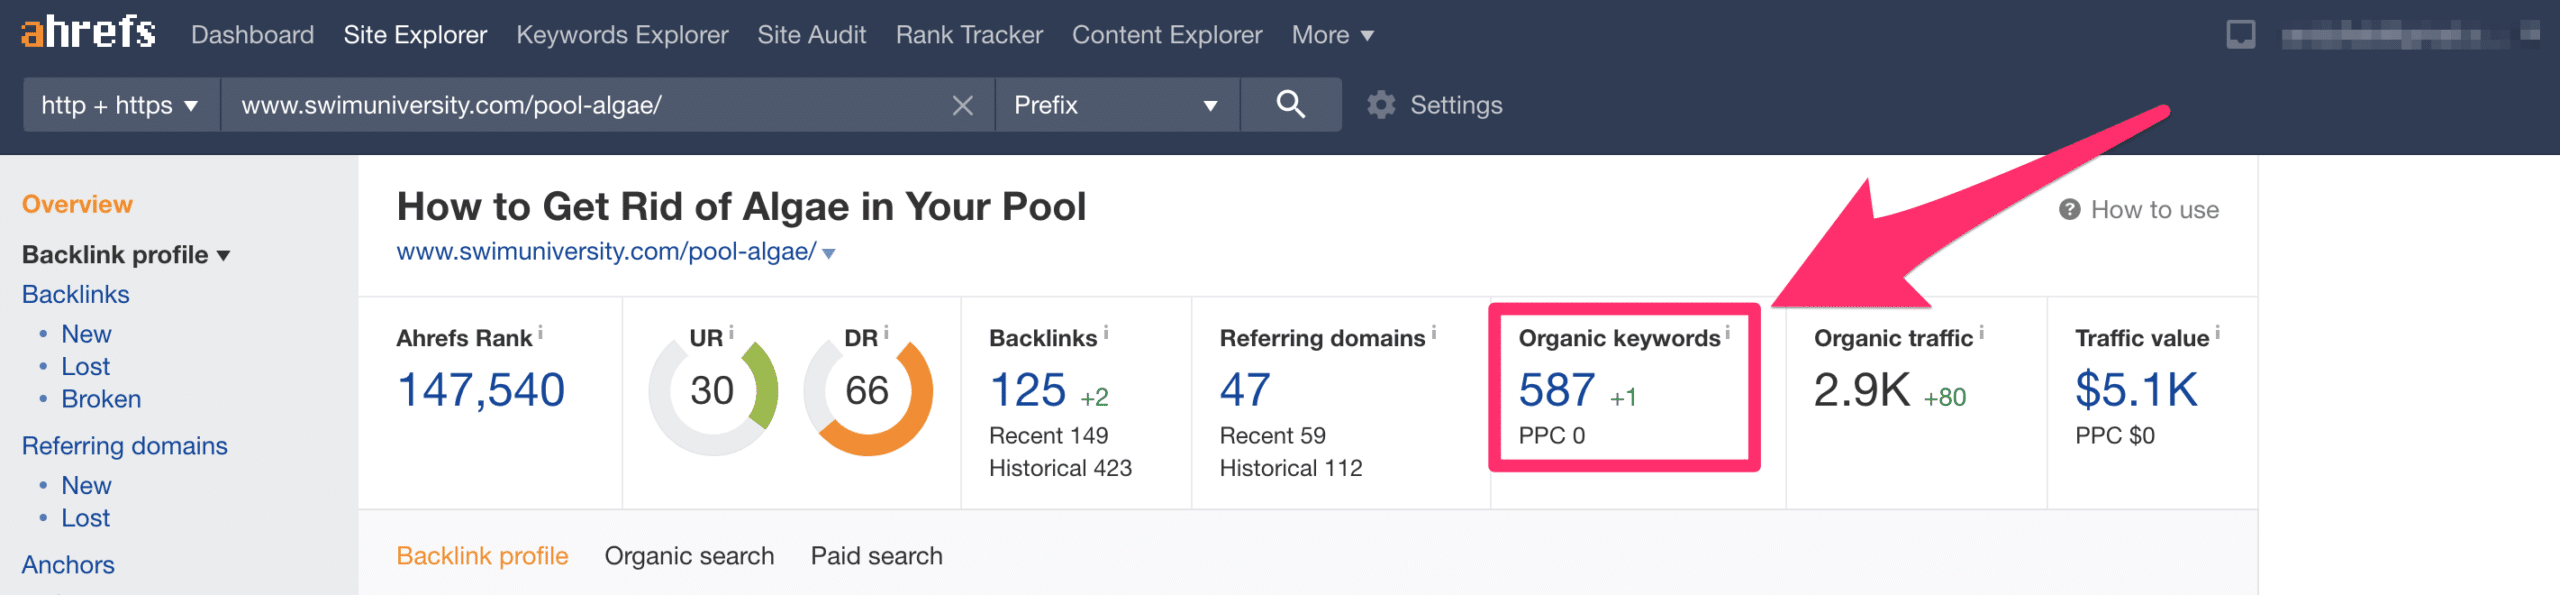 ahrefs data showing how many keywords an article ranks for